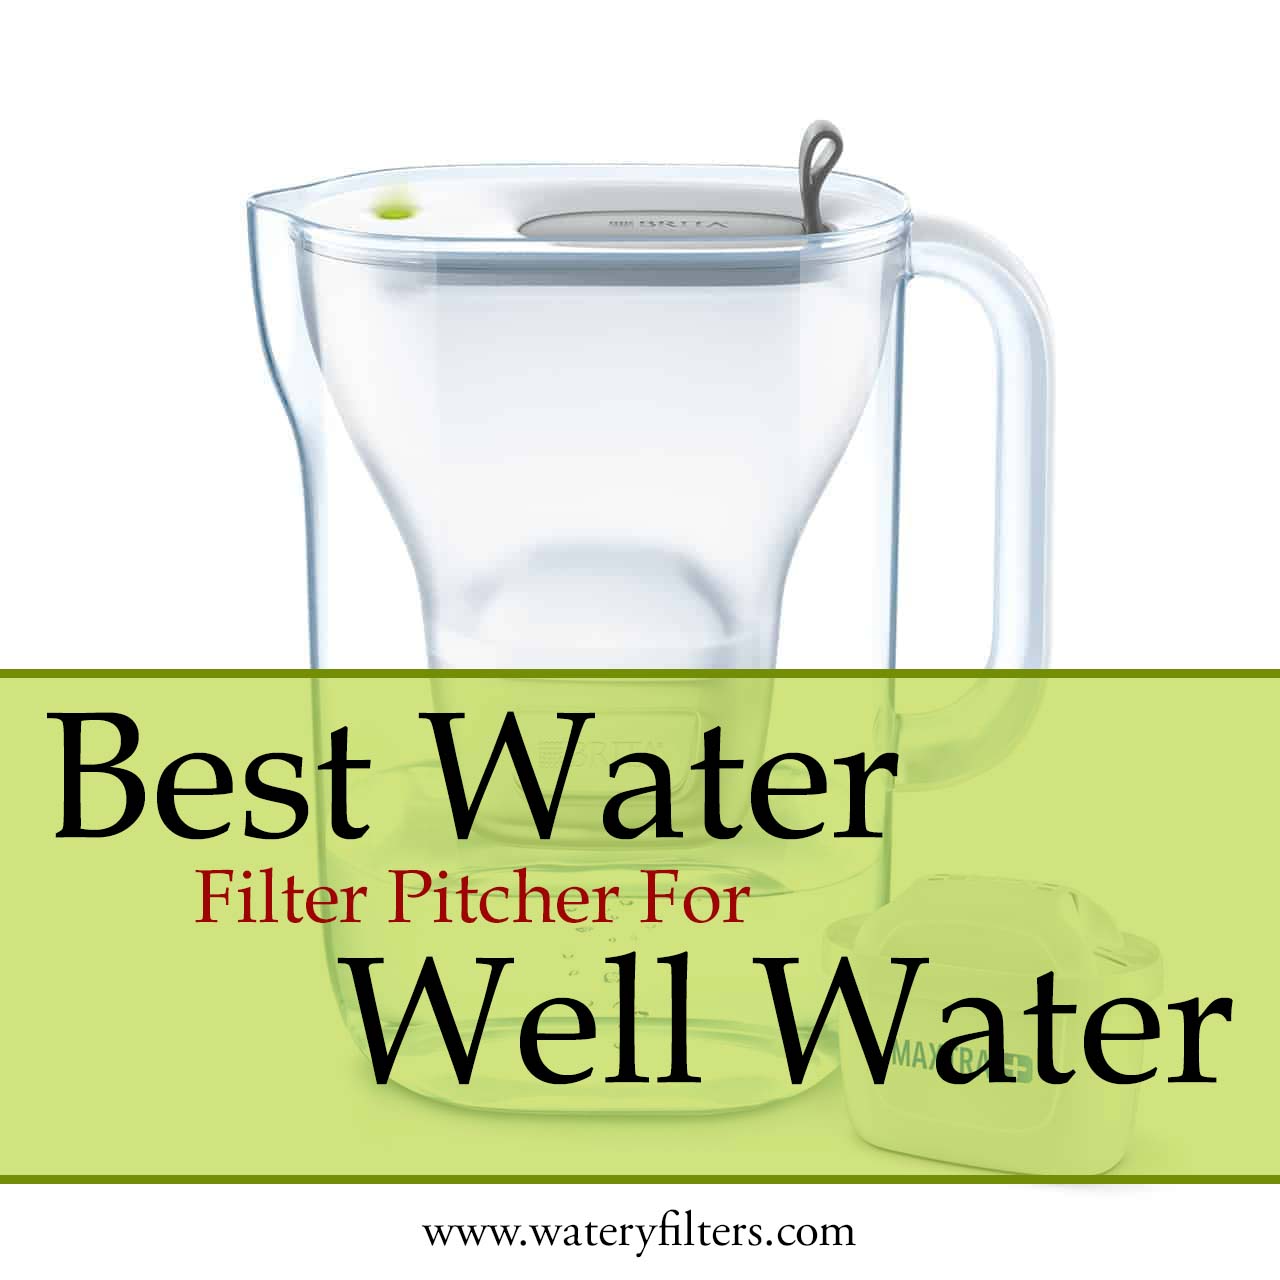 Best Water Filter Pitcher For Well Water